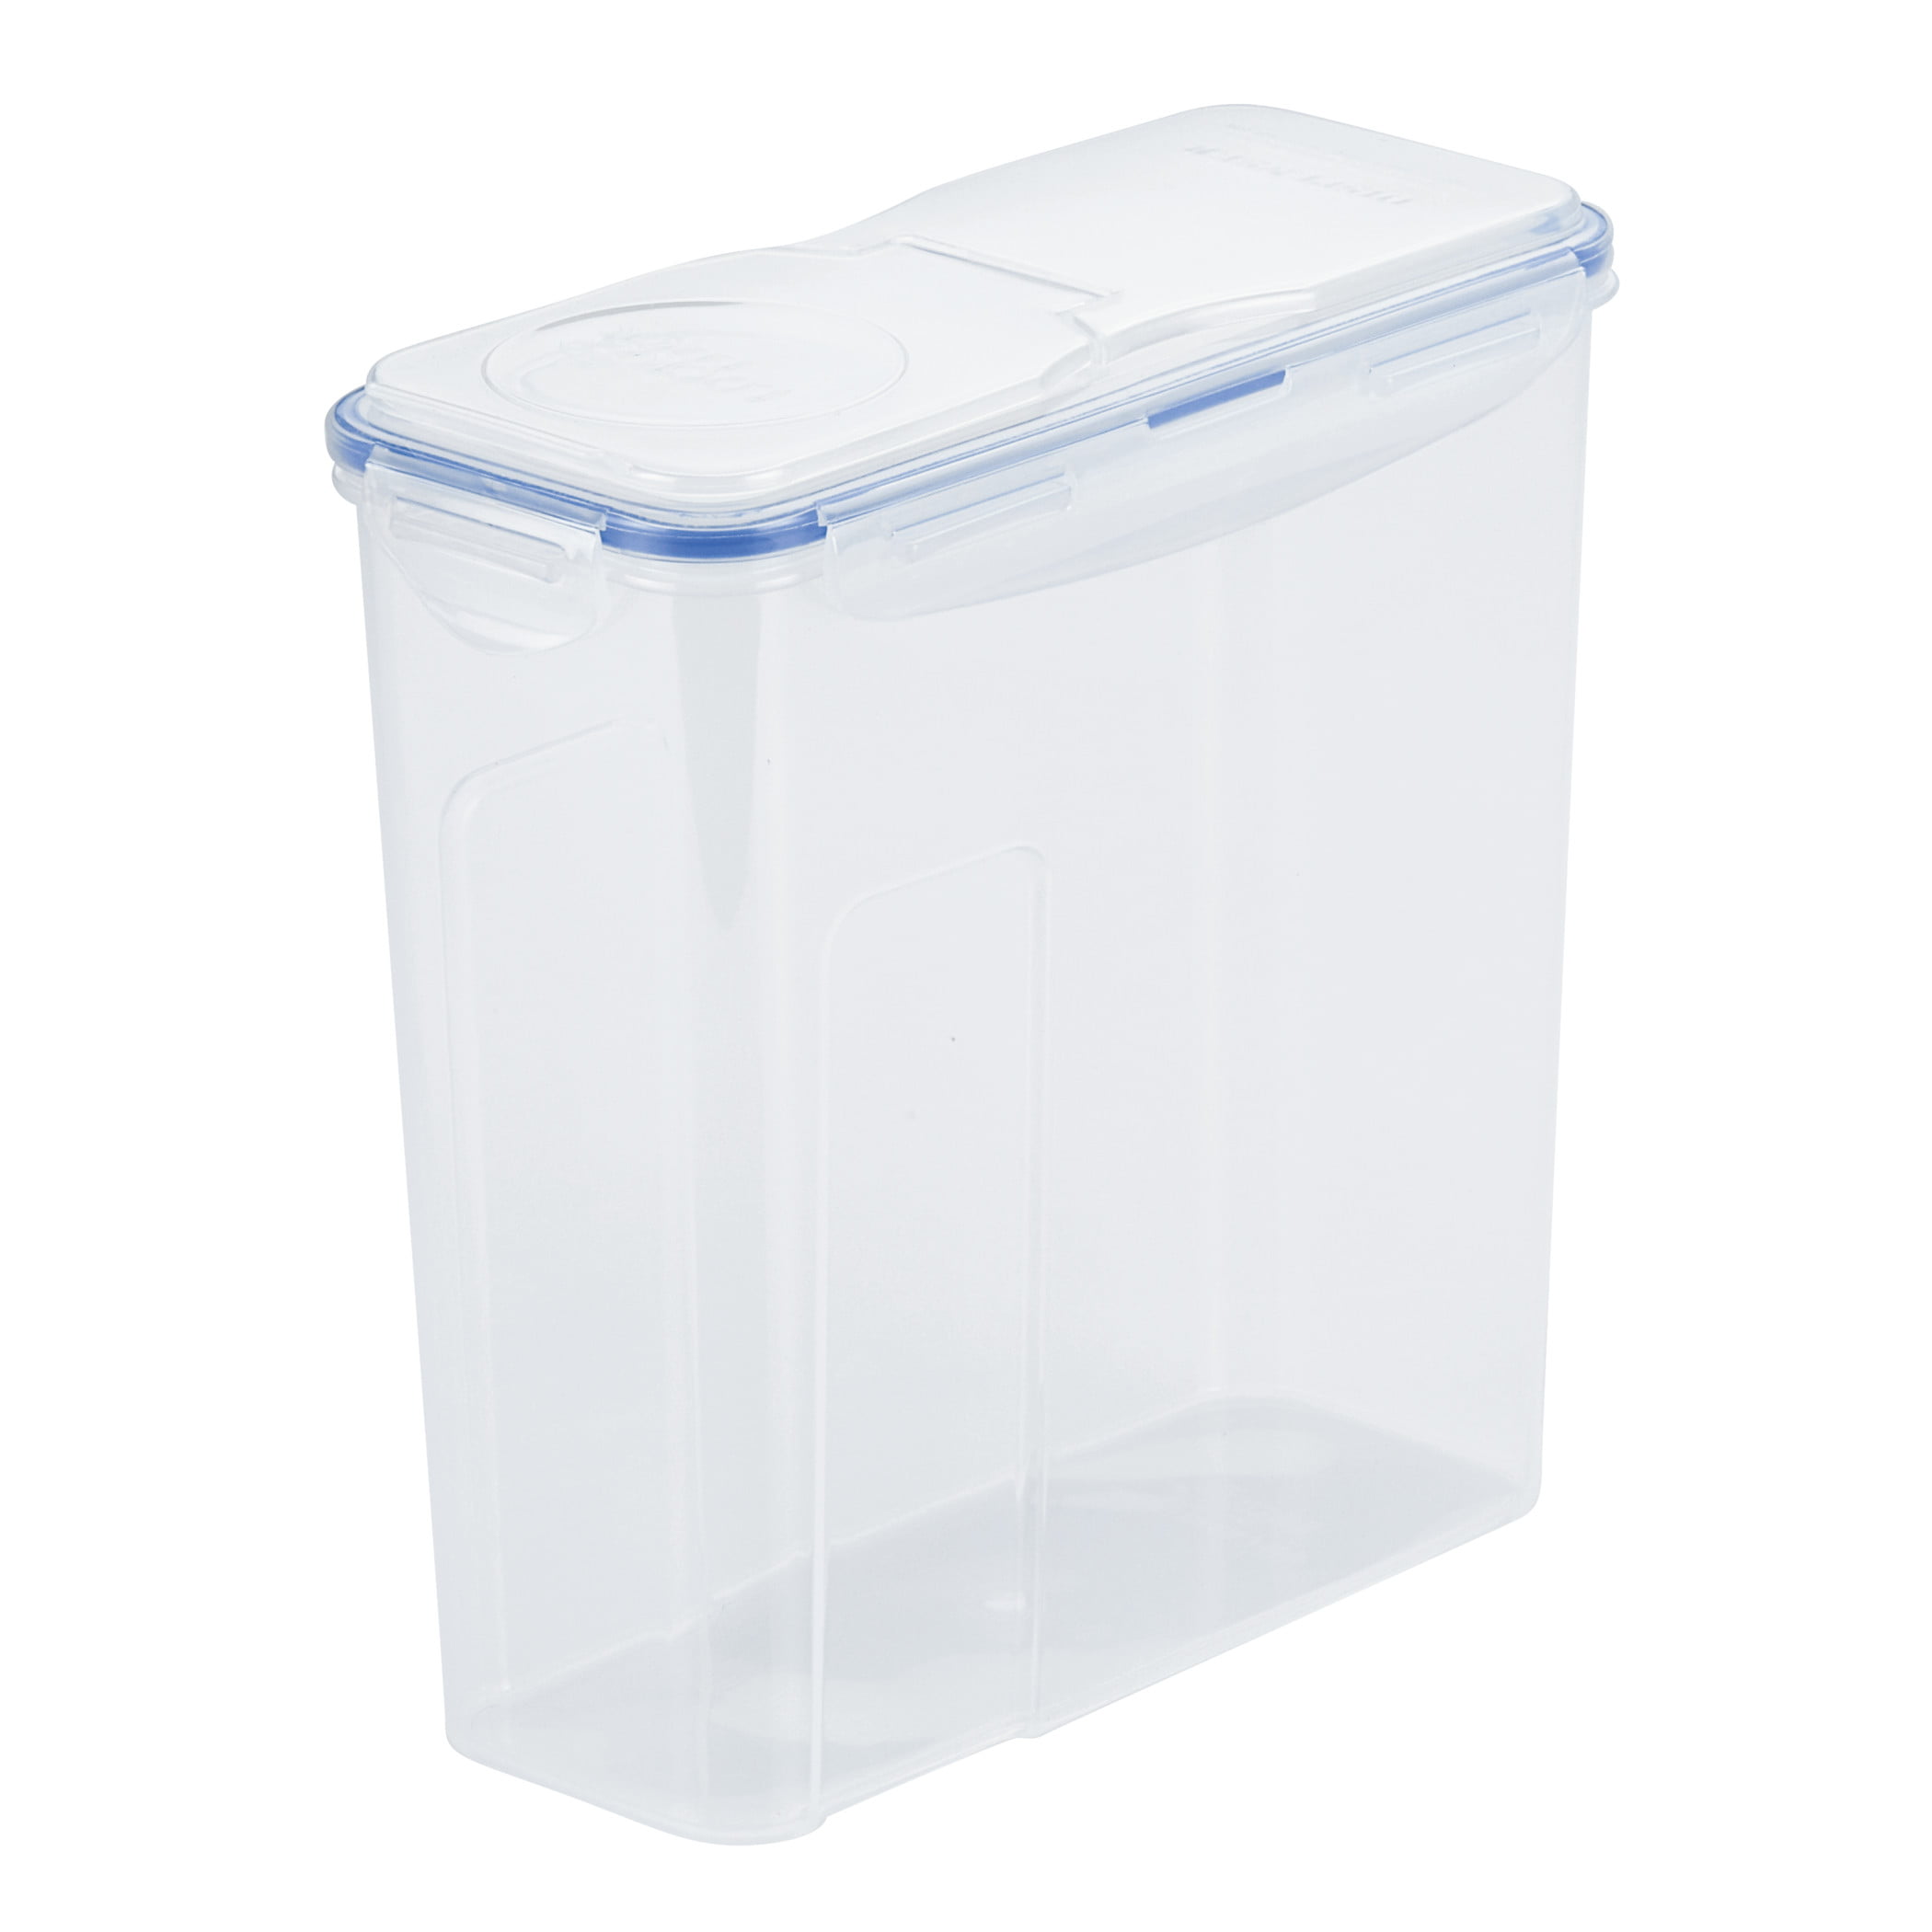 Lock and & Lock Twist Food Storage Containers Cereal LLS131 640ml 115 x 90mm 